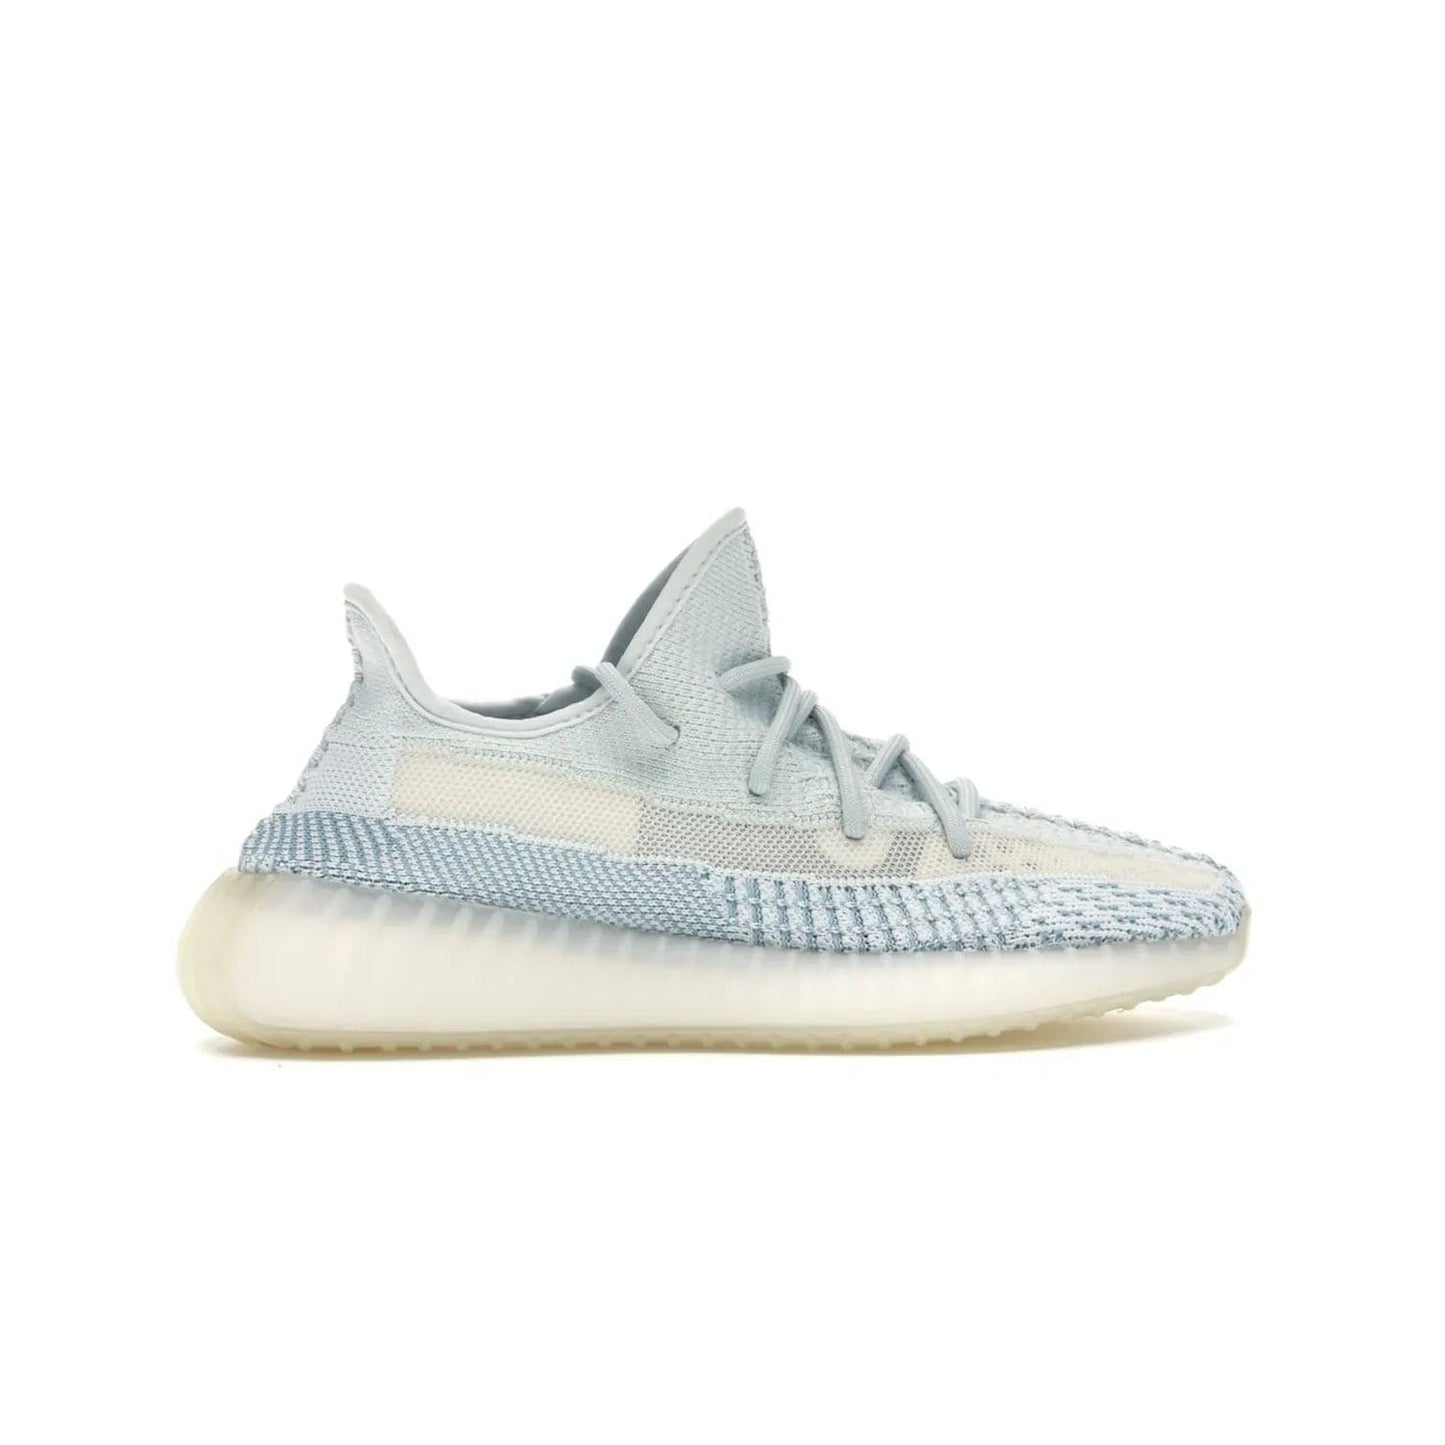 adidas Yeezy Boost 350 V2 Cloud White (Non-Reflective) - Image 36 - Only at www.BallersClubKickz.com - Adidas Yeezy Boost 350 V2 Cloud White (Non-Reflective) features Primeknit fabric and a unique, eye-catching design of cream, bluish-white, and transparent strip. Step out in timeless style with this eye-catching sneaker.